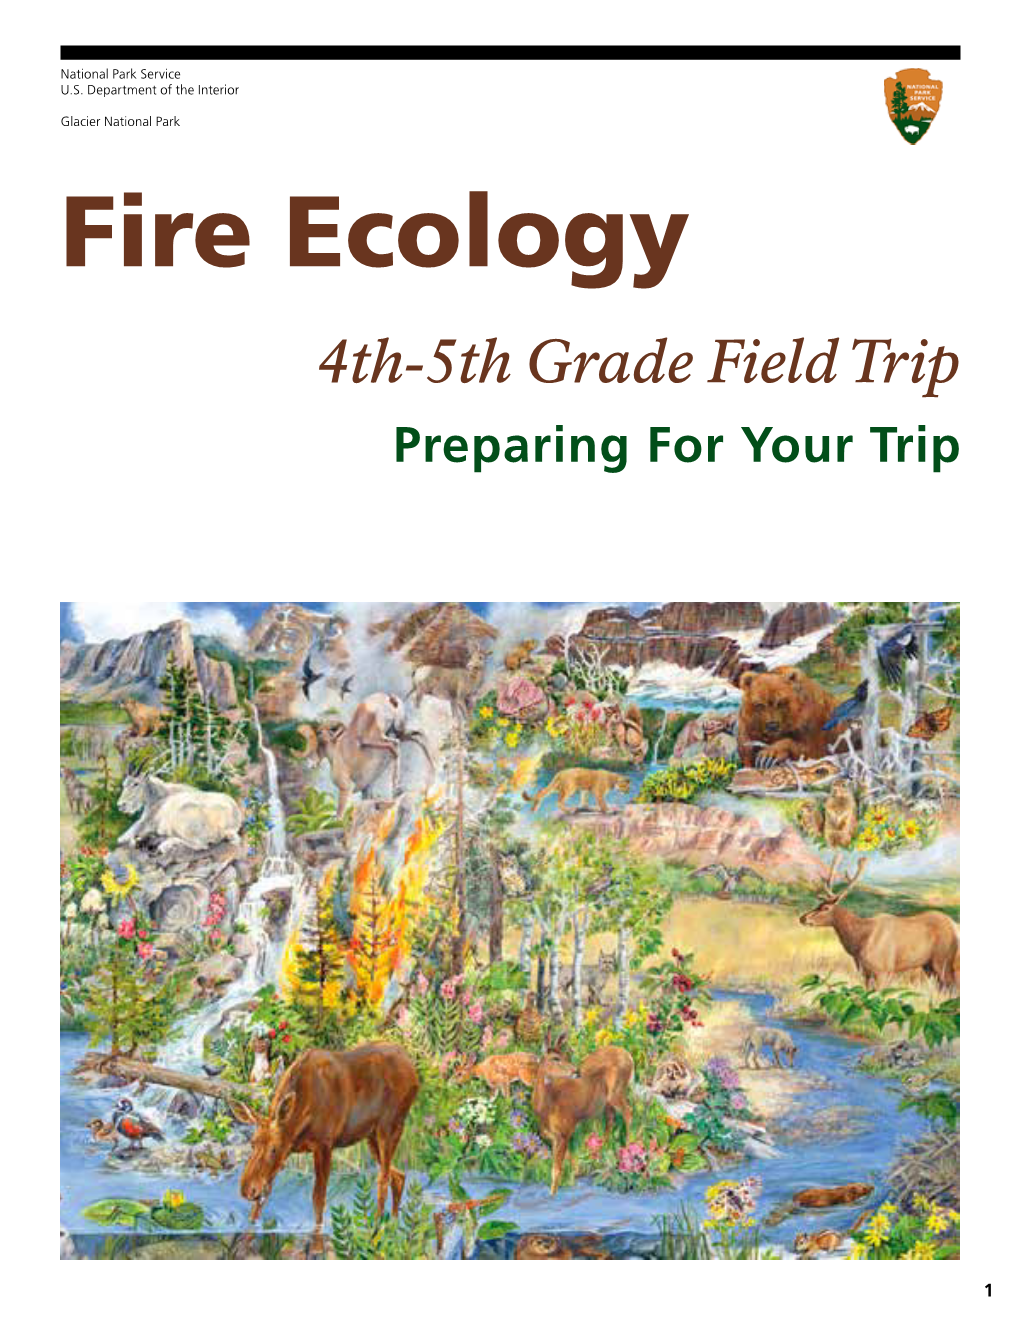 Fire Ecology 4Th-5Th Grade Field Trip Preparing for Your Trip